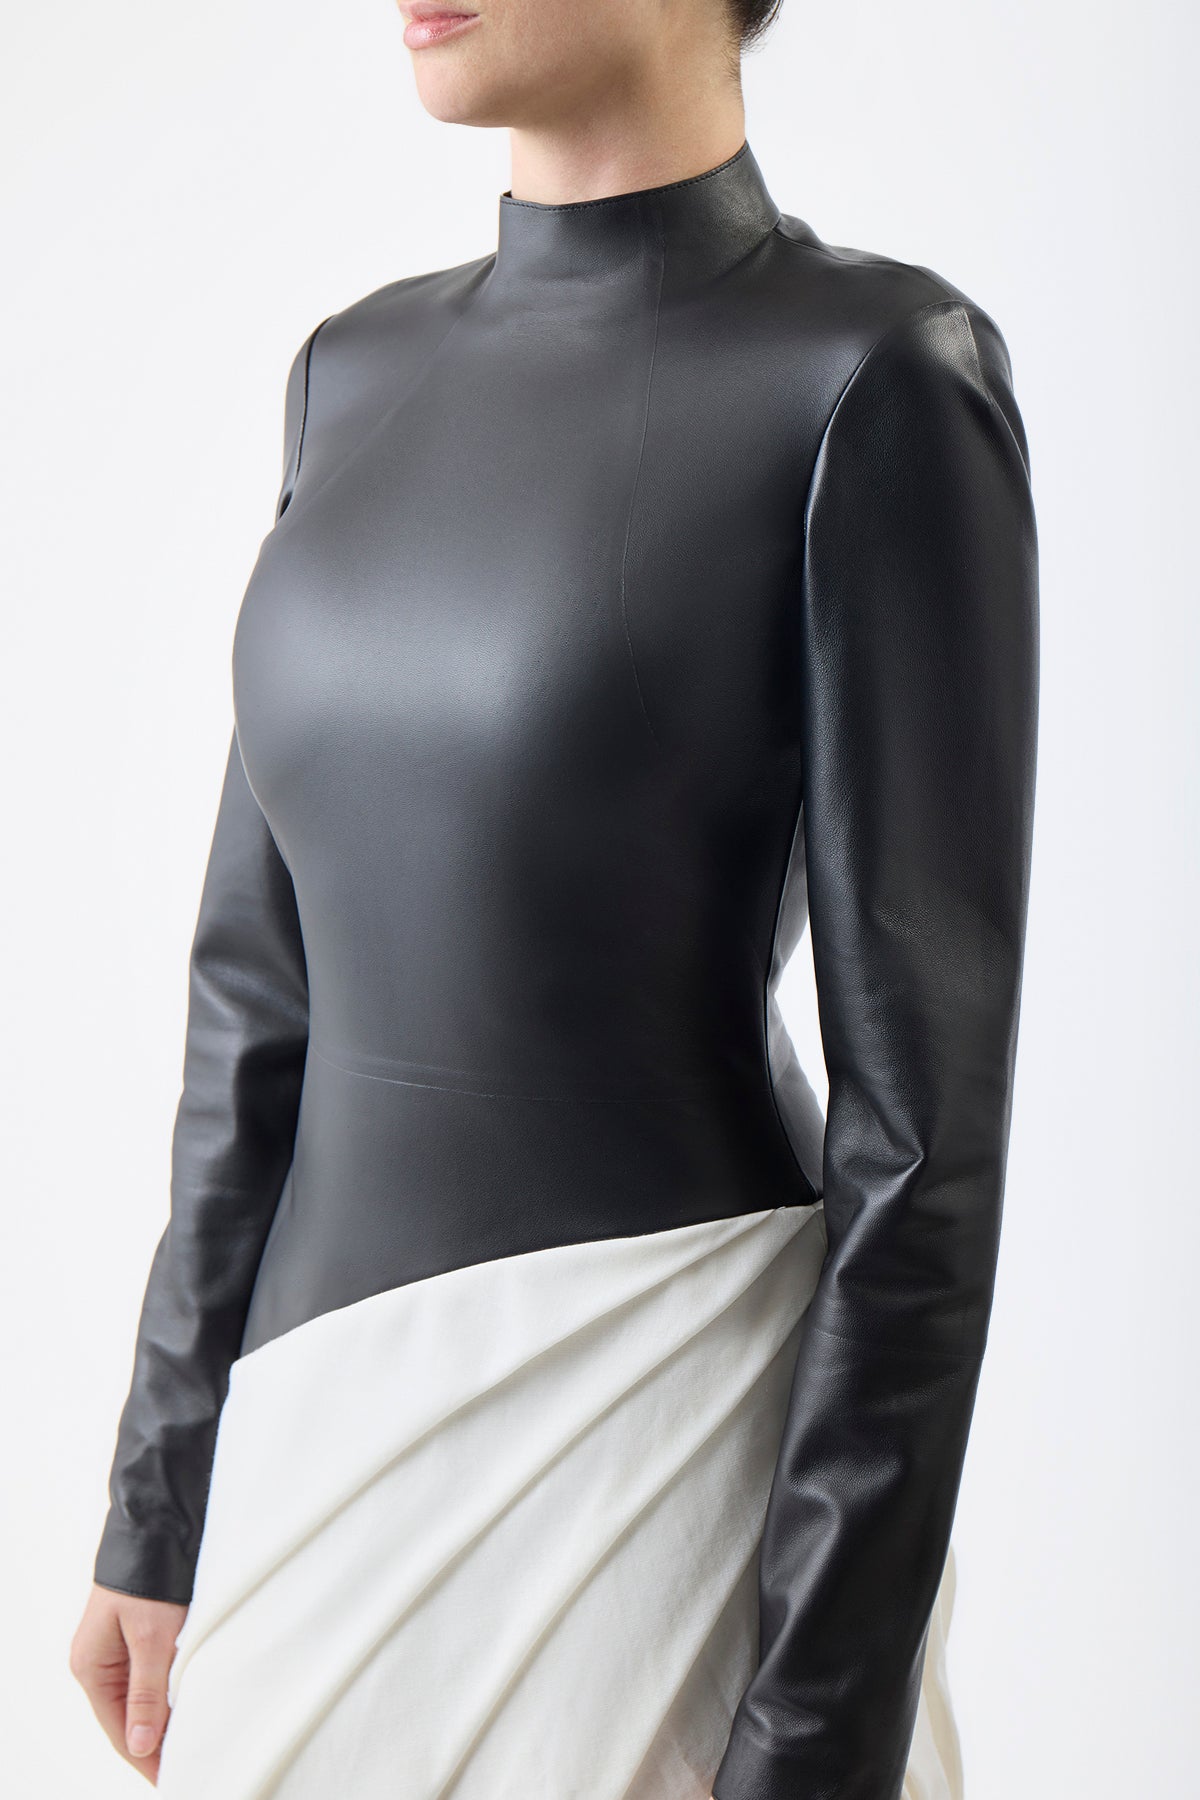 Aulay Pleated Dress in Black Leather & Ivory Wool Cashmere